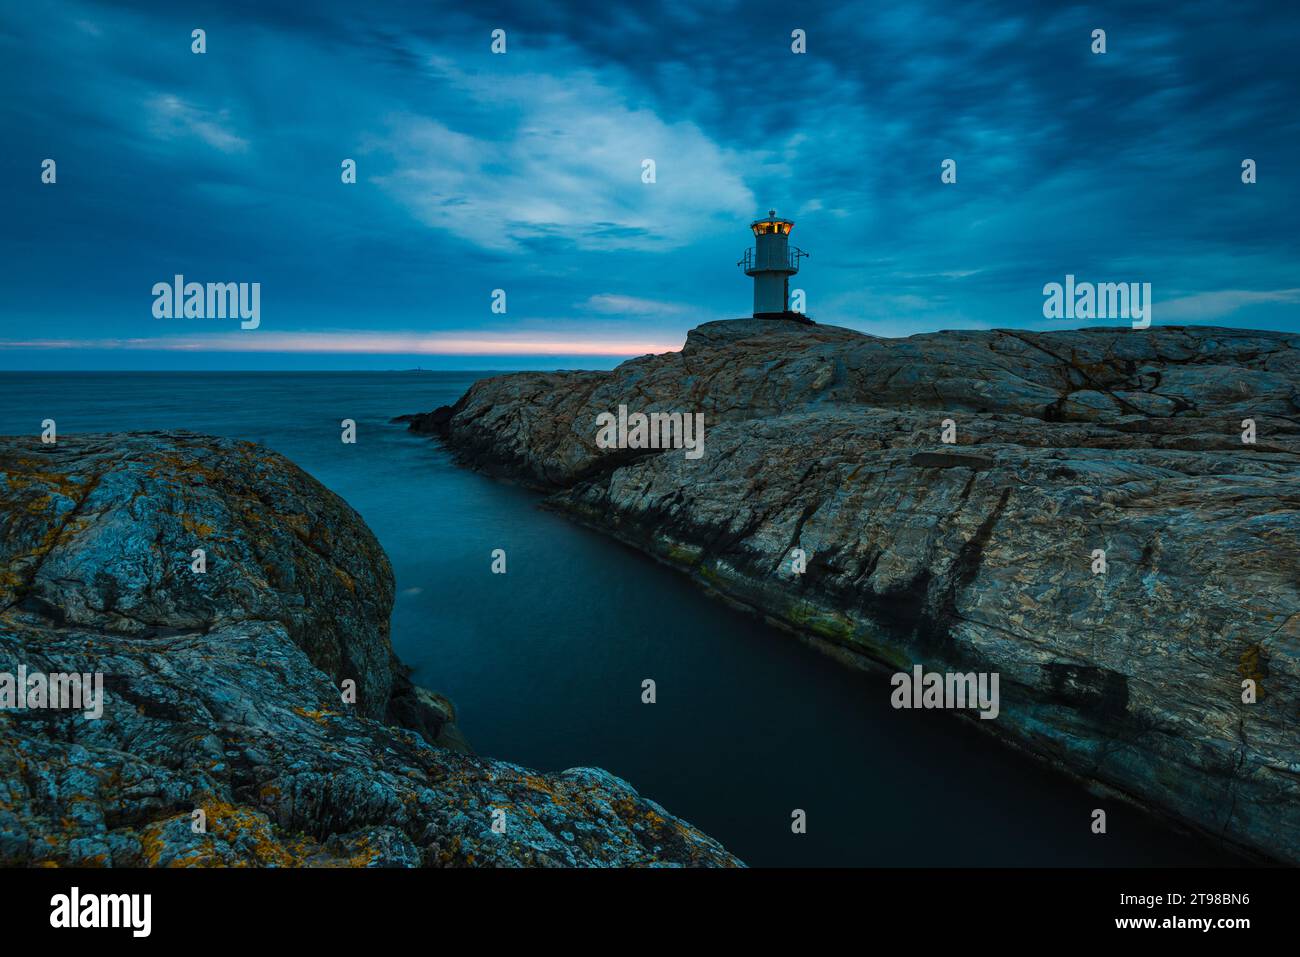 A coastal lighthouse guides night travelers towards protection and security. Stock Photo